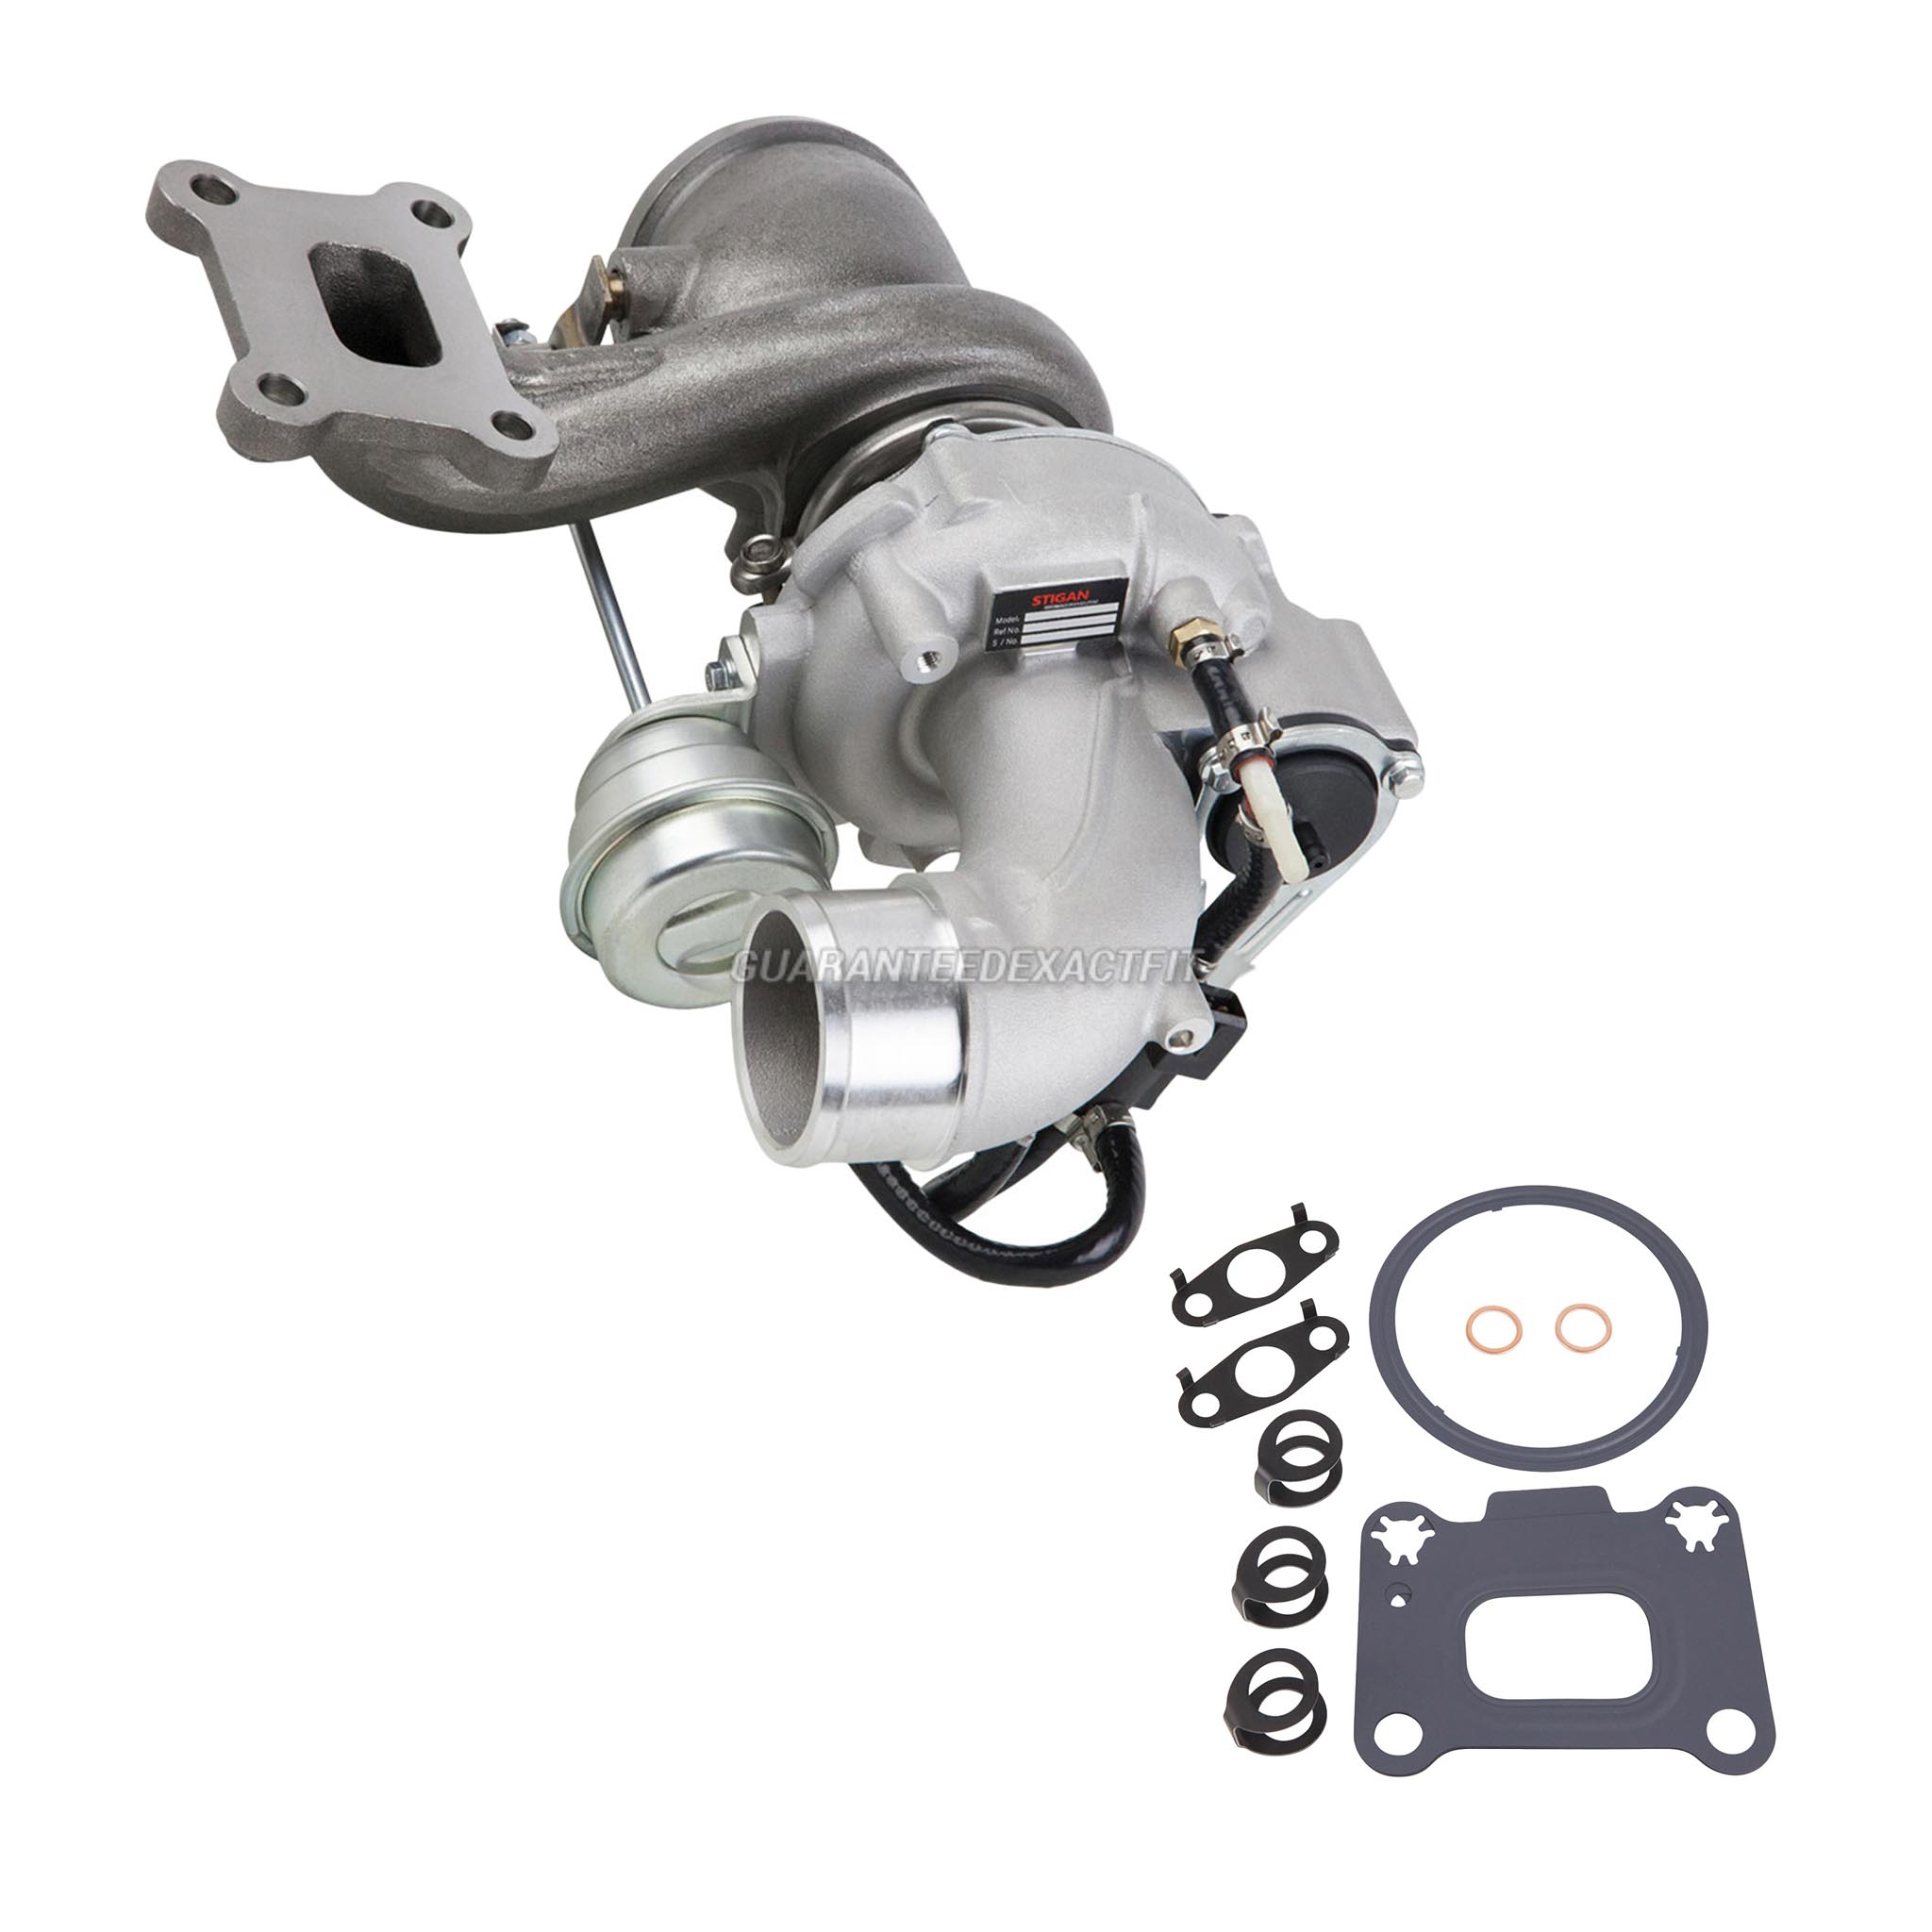  Lincoln mkc turbocharger and installation accessory kit 